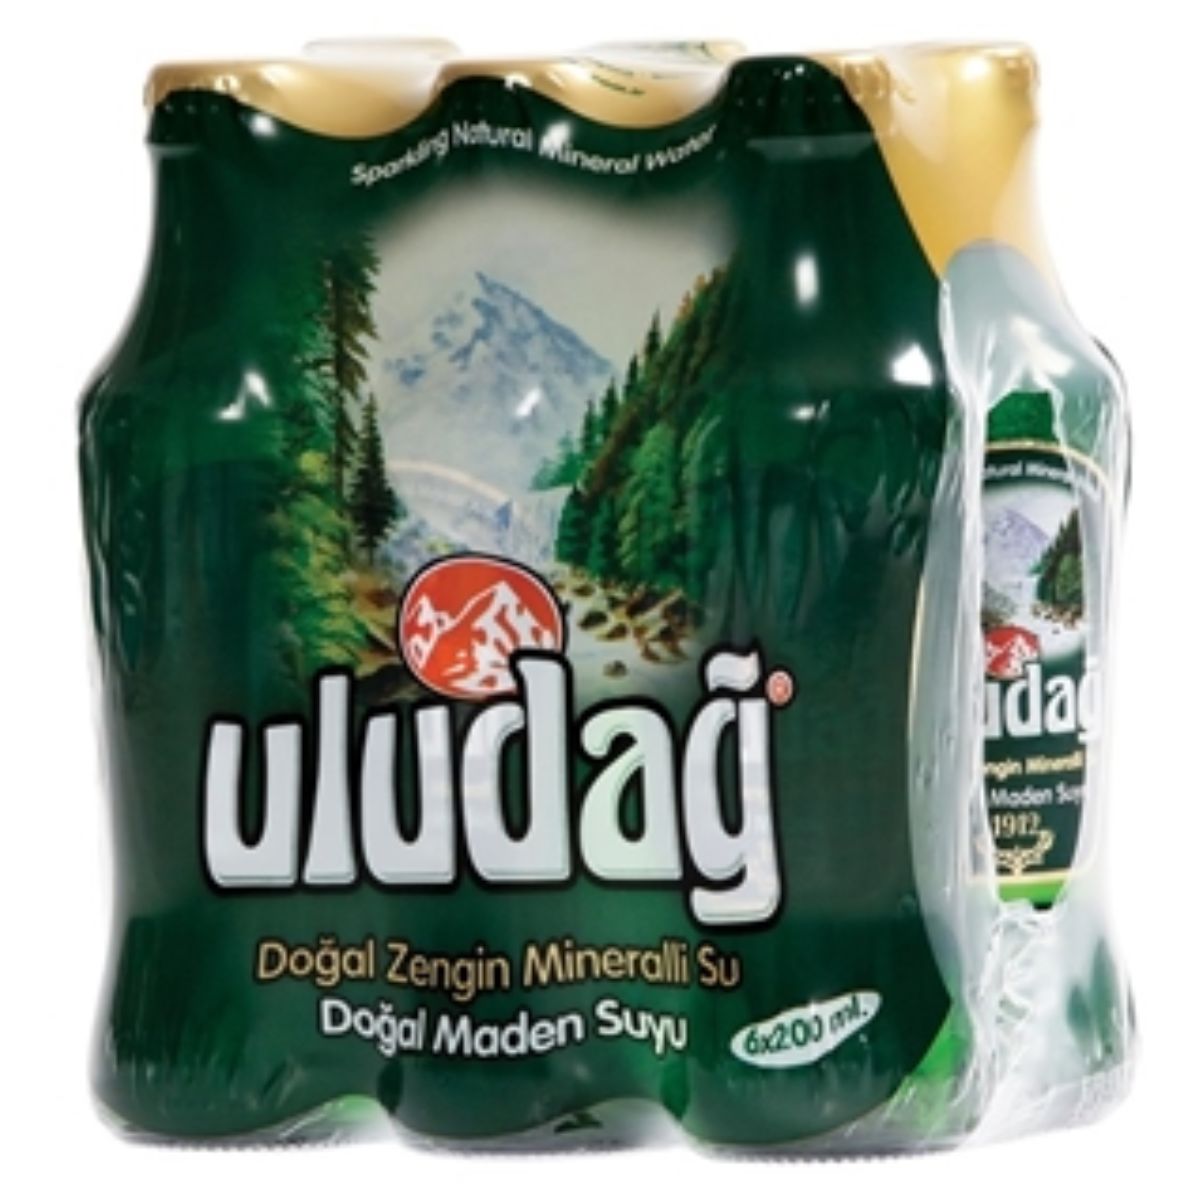 Six-pack of Uludag - Natural Sparkling Mineral Water - 6 x 200ml with green forest and mountain imagery on the labels.